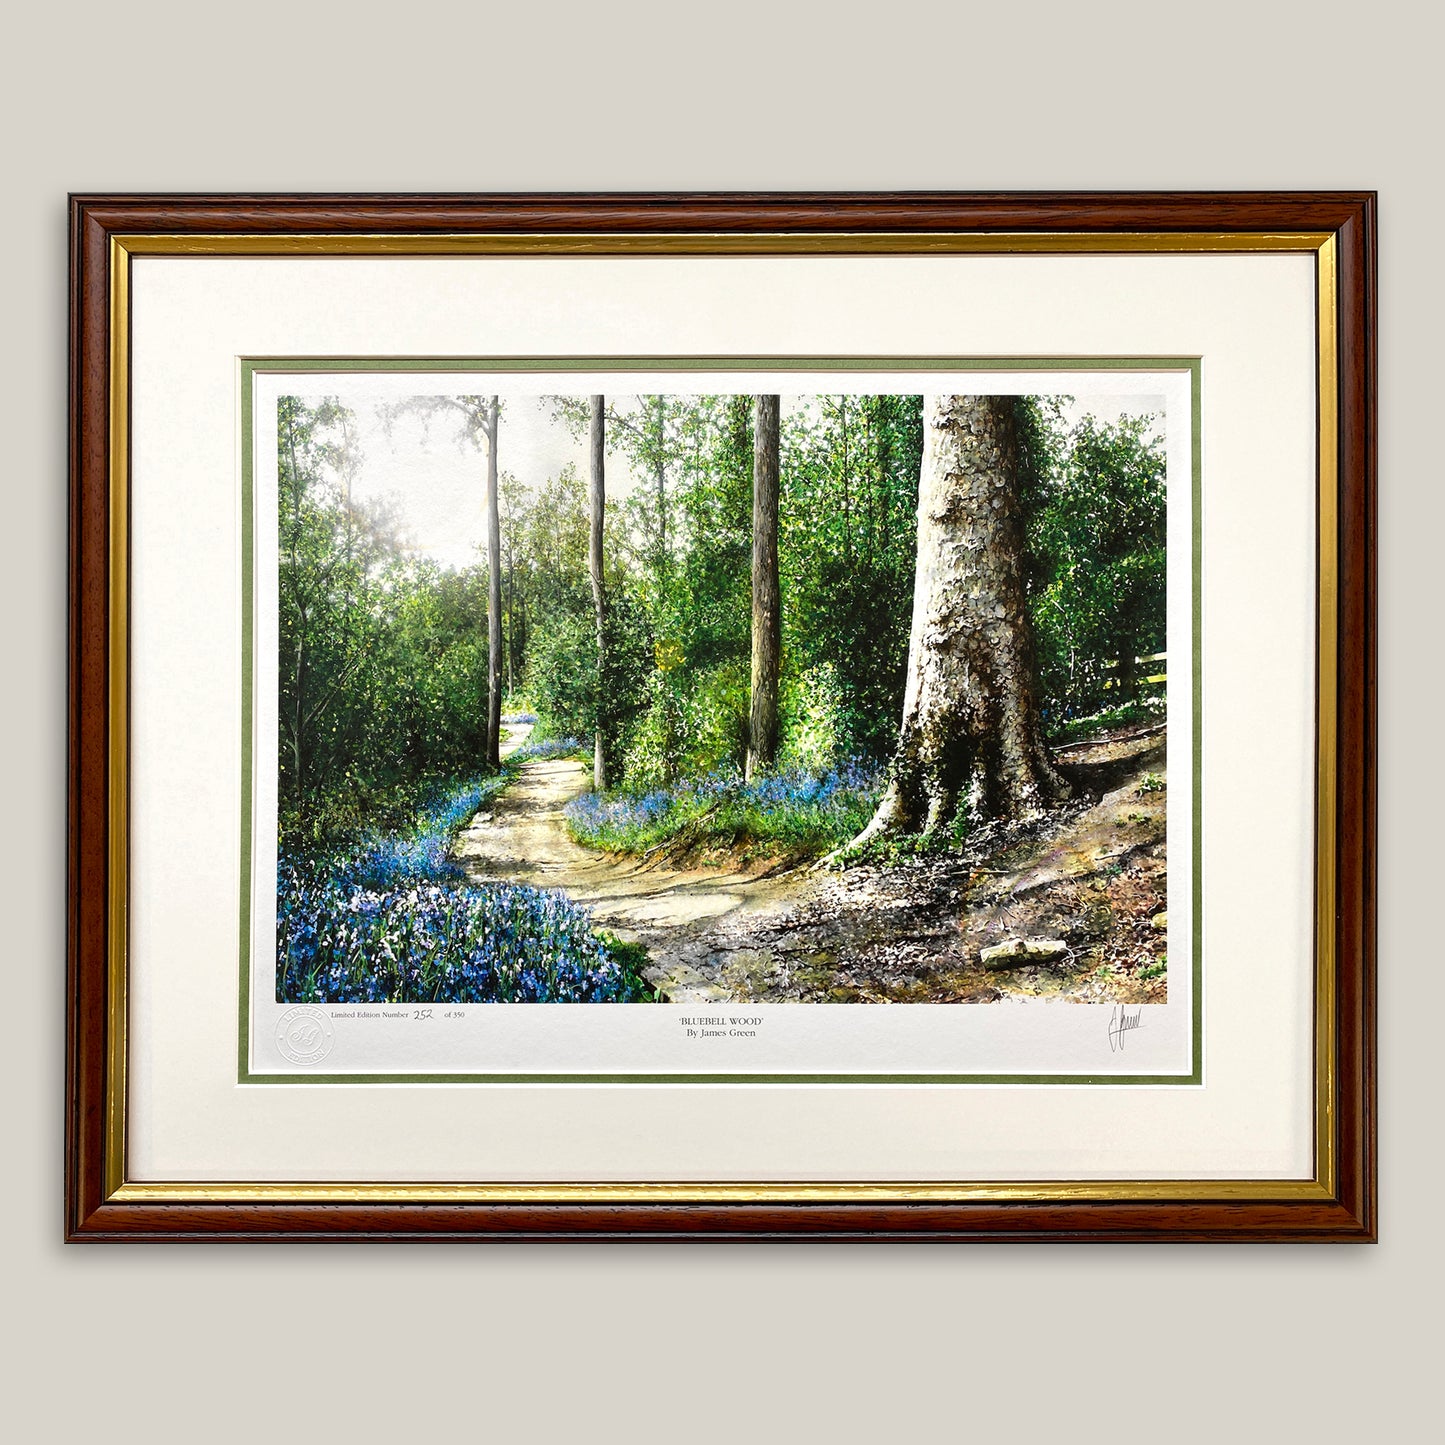 Painting of the bluebell wood at Thorpe Wood Peterborough framed in dark wood with a gold trim